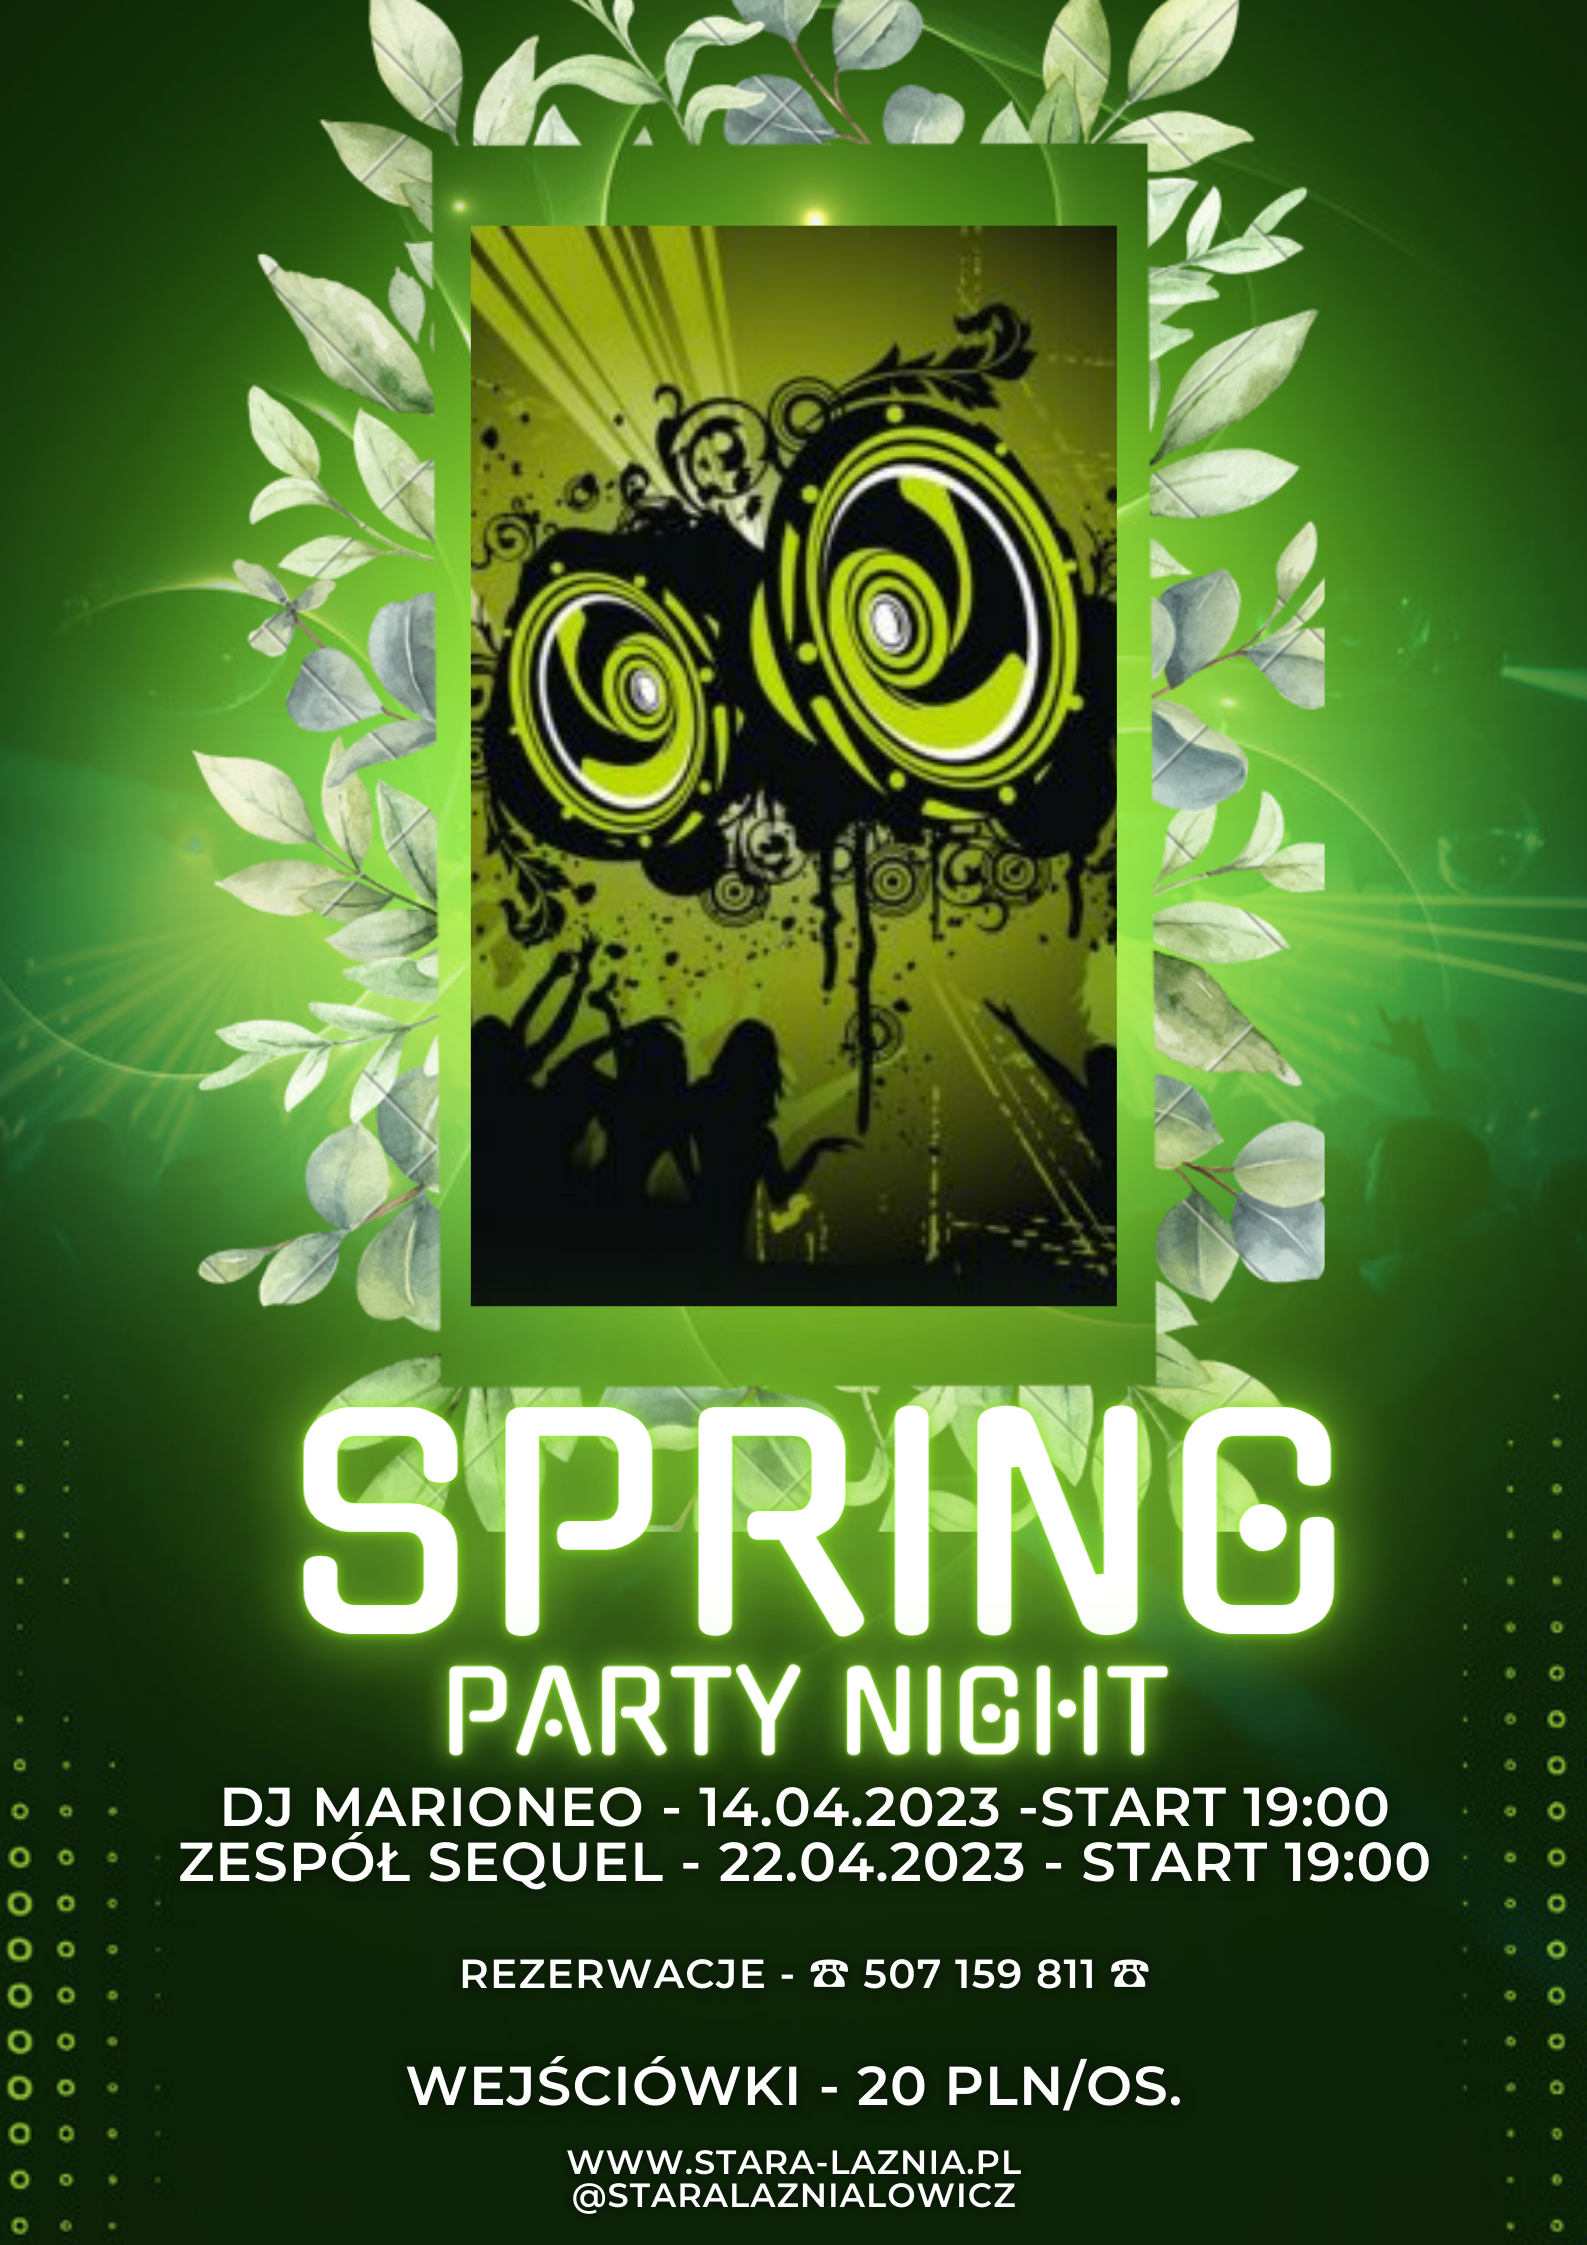 SPRING PARTY NIGHT